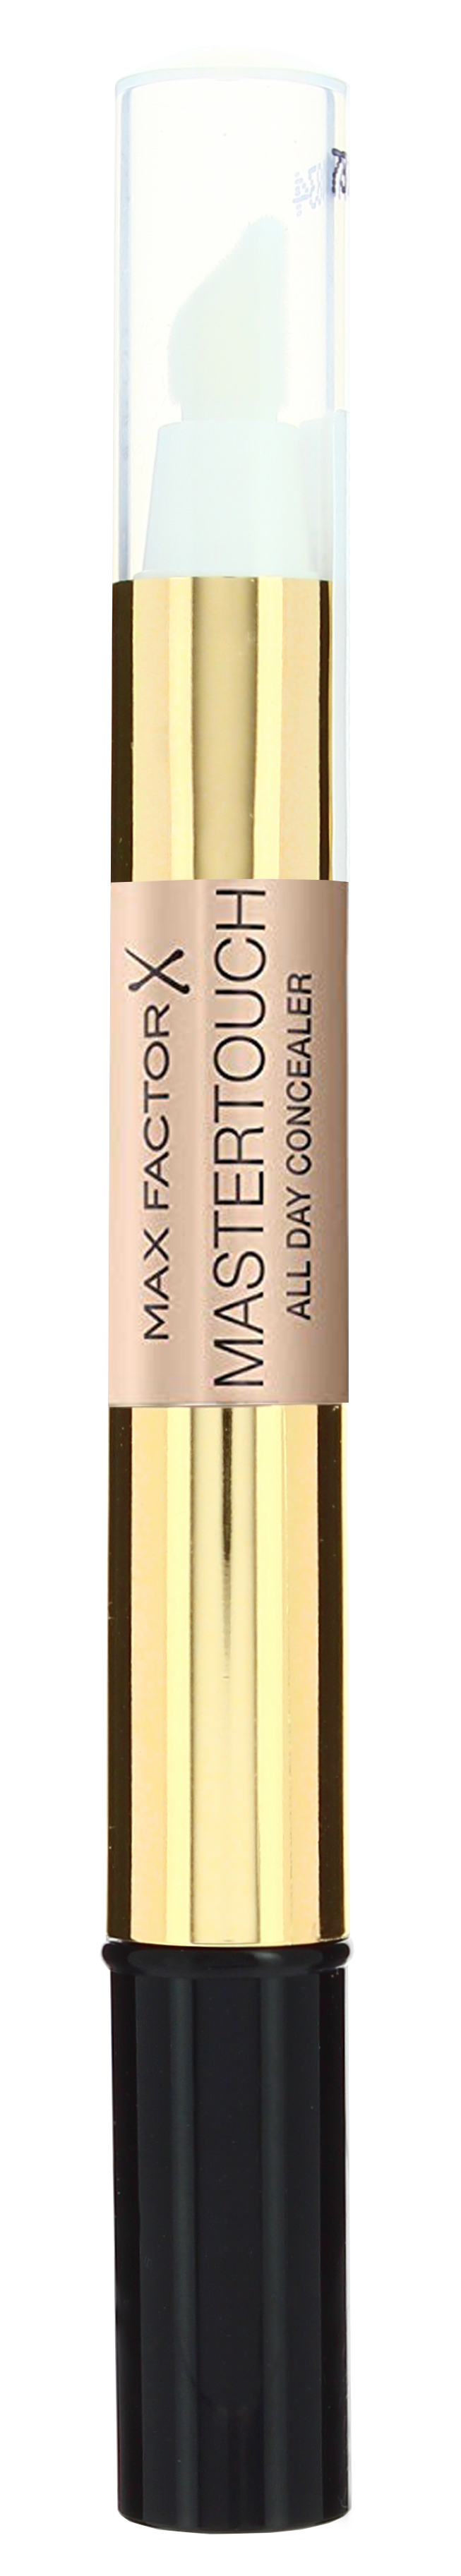 Max Factor - Mastertouch Concealer